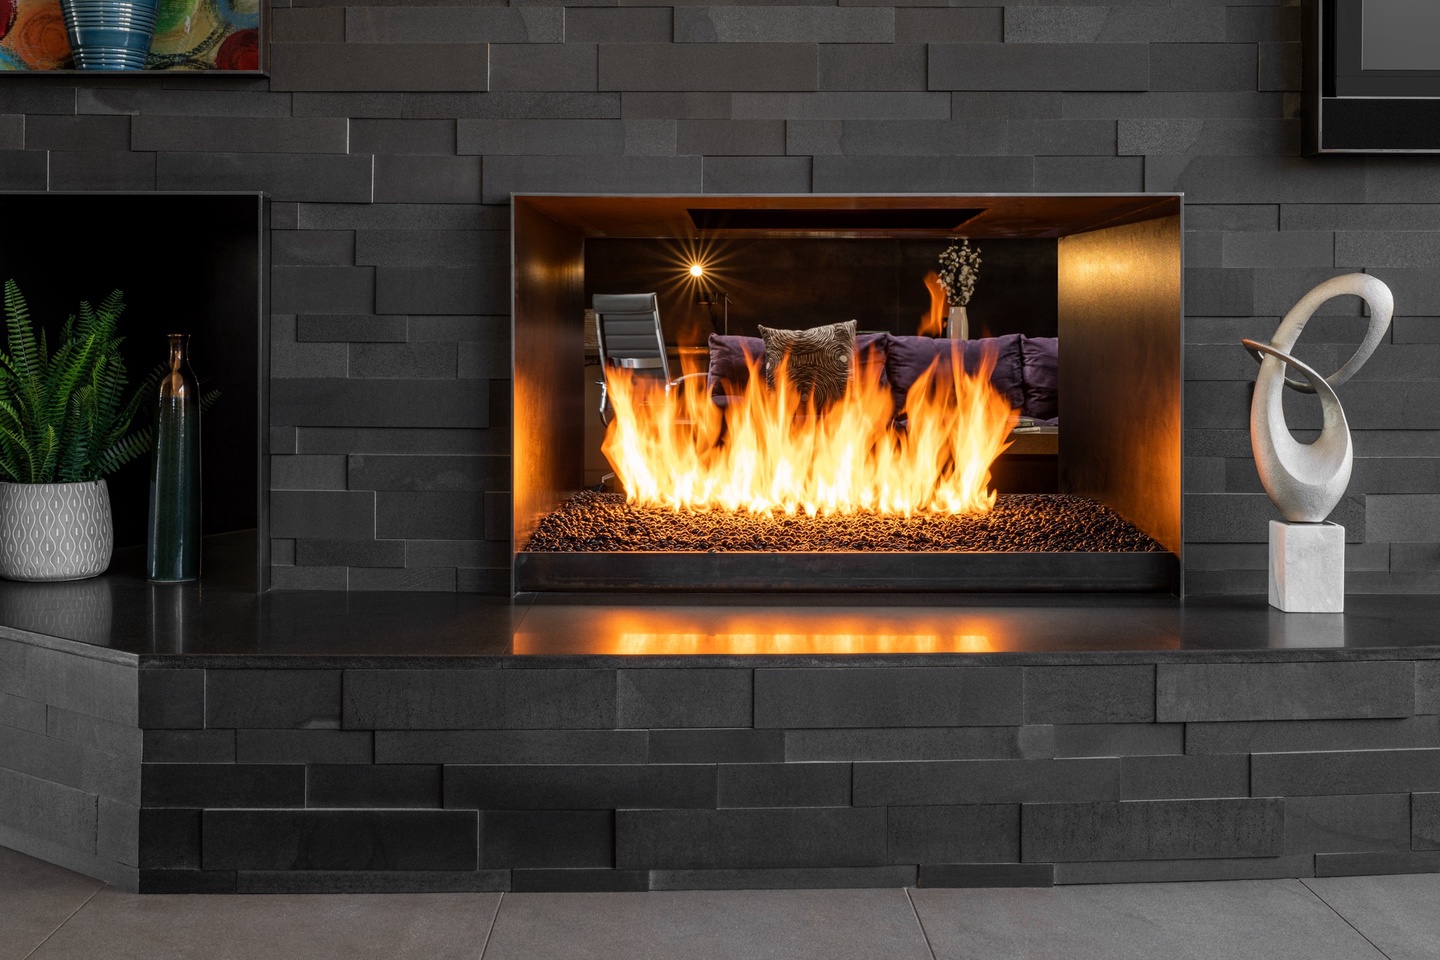 Two-way fireplace